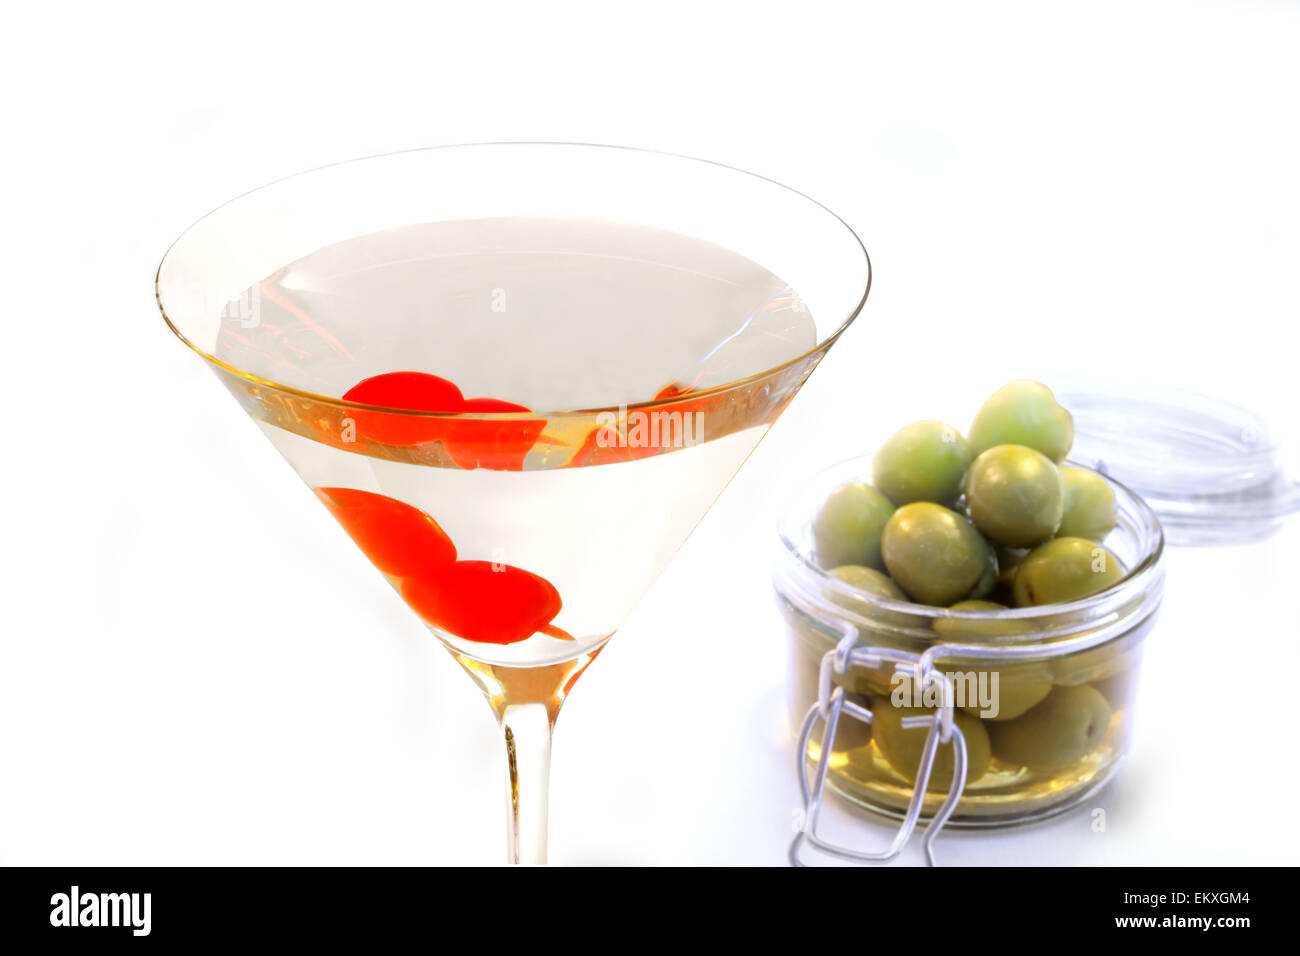 A cocktail glass containing a clear alcoholic drink and two cherries on a stick, with a container of olives in the background Stock Photo